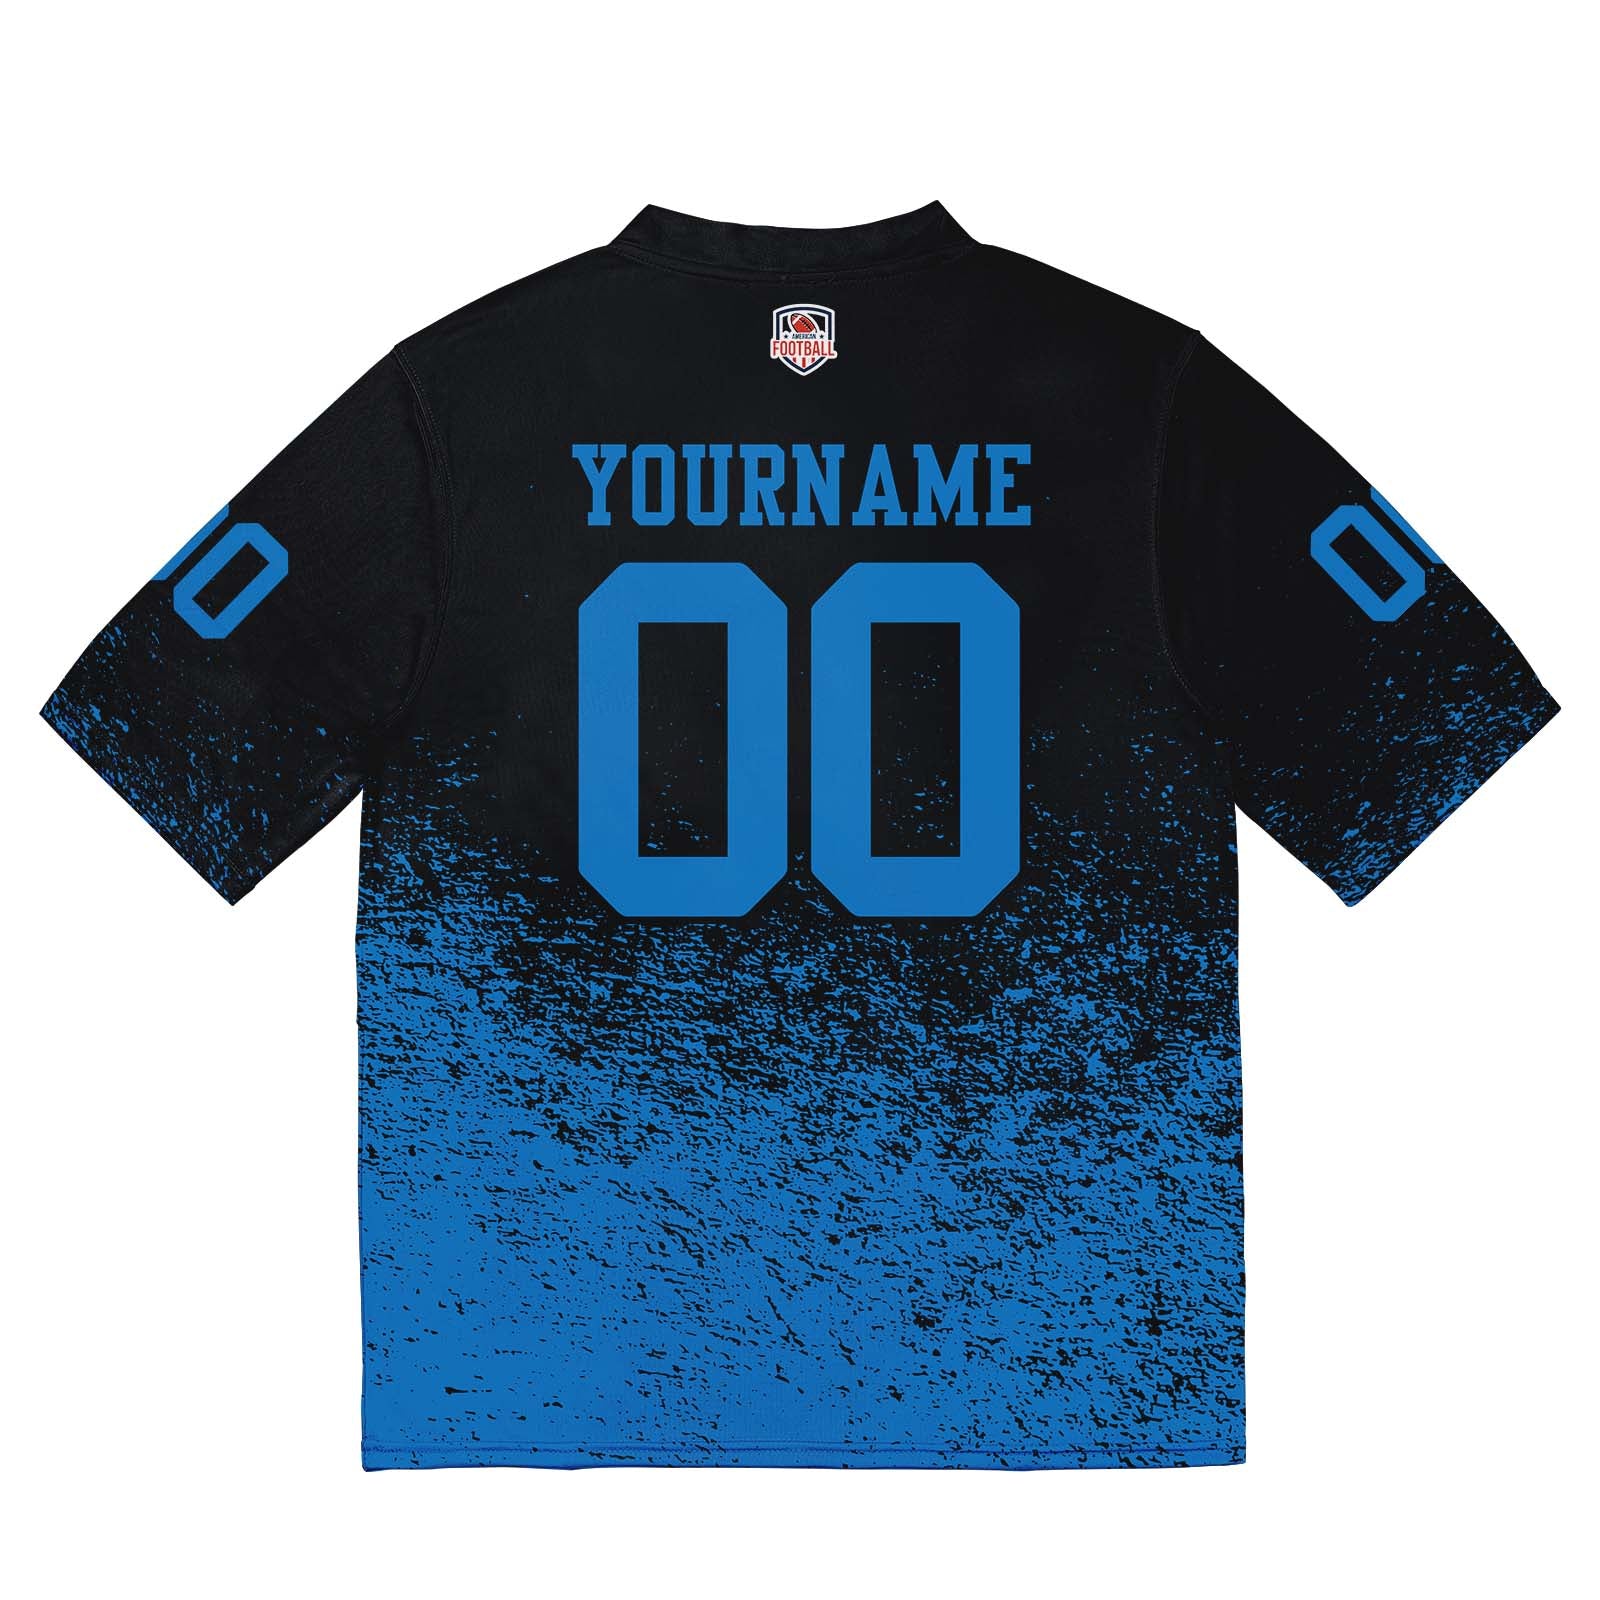 Custom Football Jersey Shirt Personalized Stitched Printed Team Name Number Black & Blue